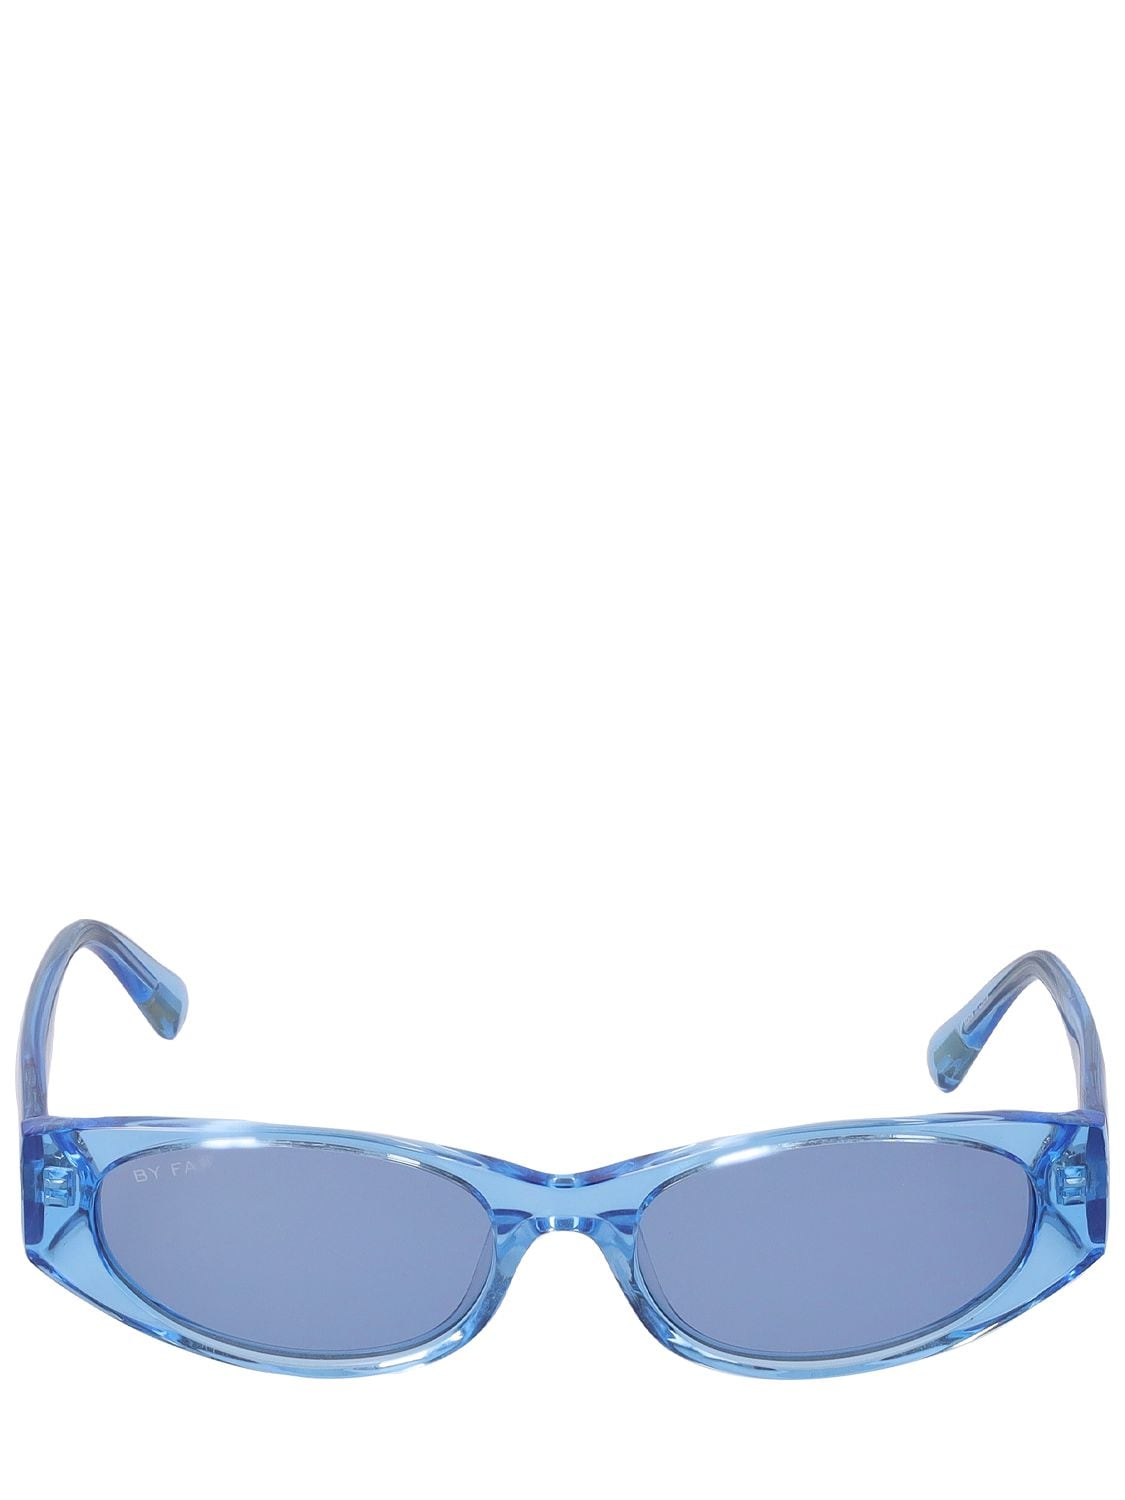 BY FAR RODEO SQUARED ACETATE SUNGLASSES